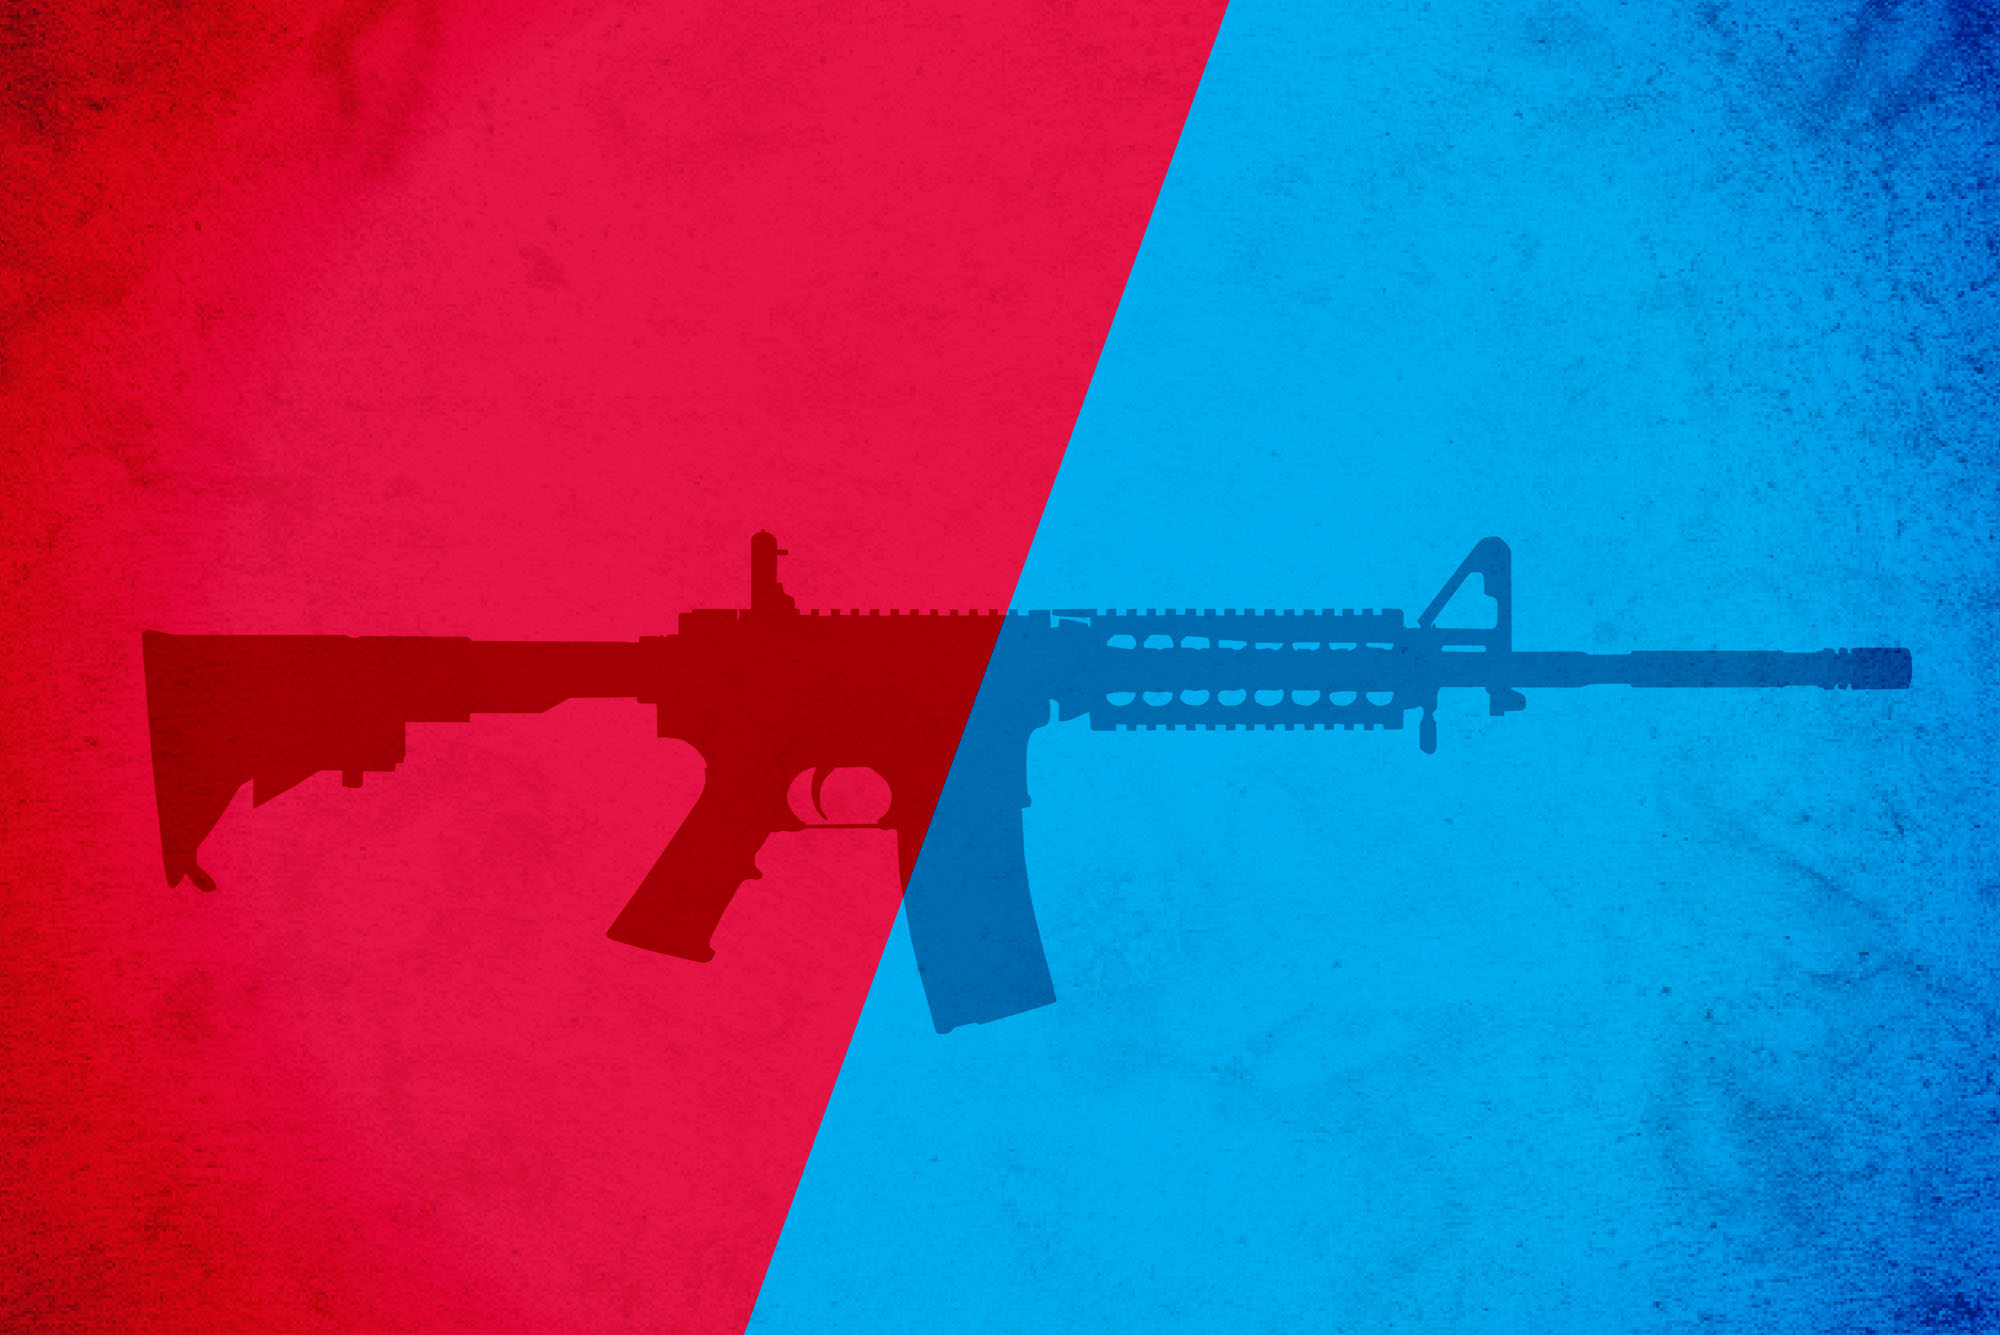 Image: Silhouette of an AR-15 rifle center on a red and blue background. Red and blue background are separated in half vertically diagonal and splits the rifle into a red and blue half.